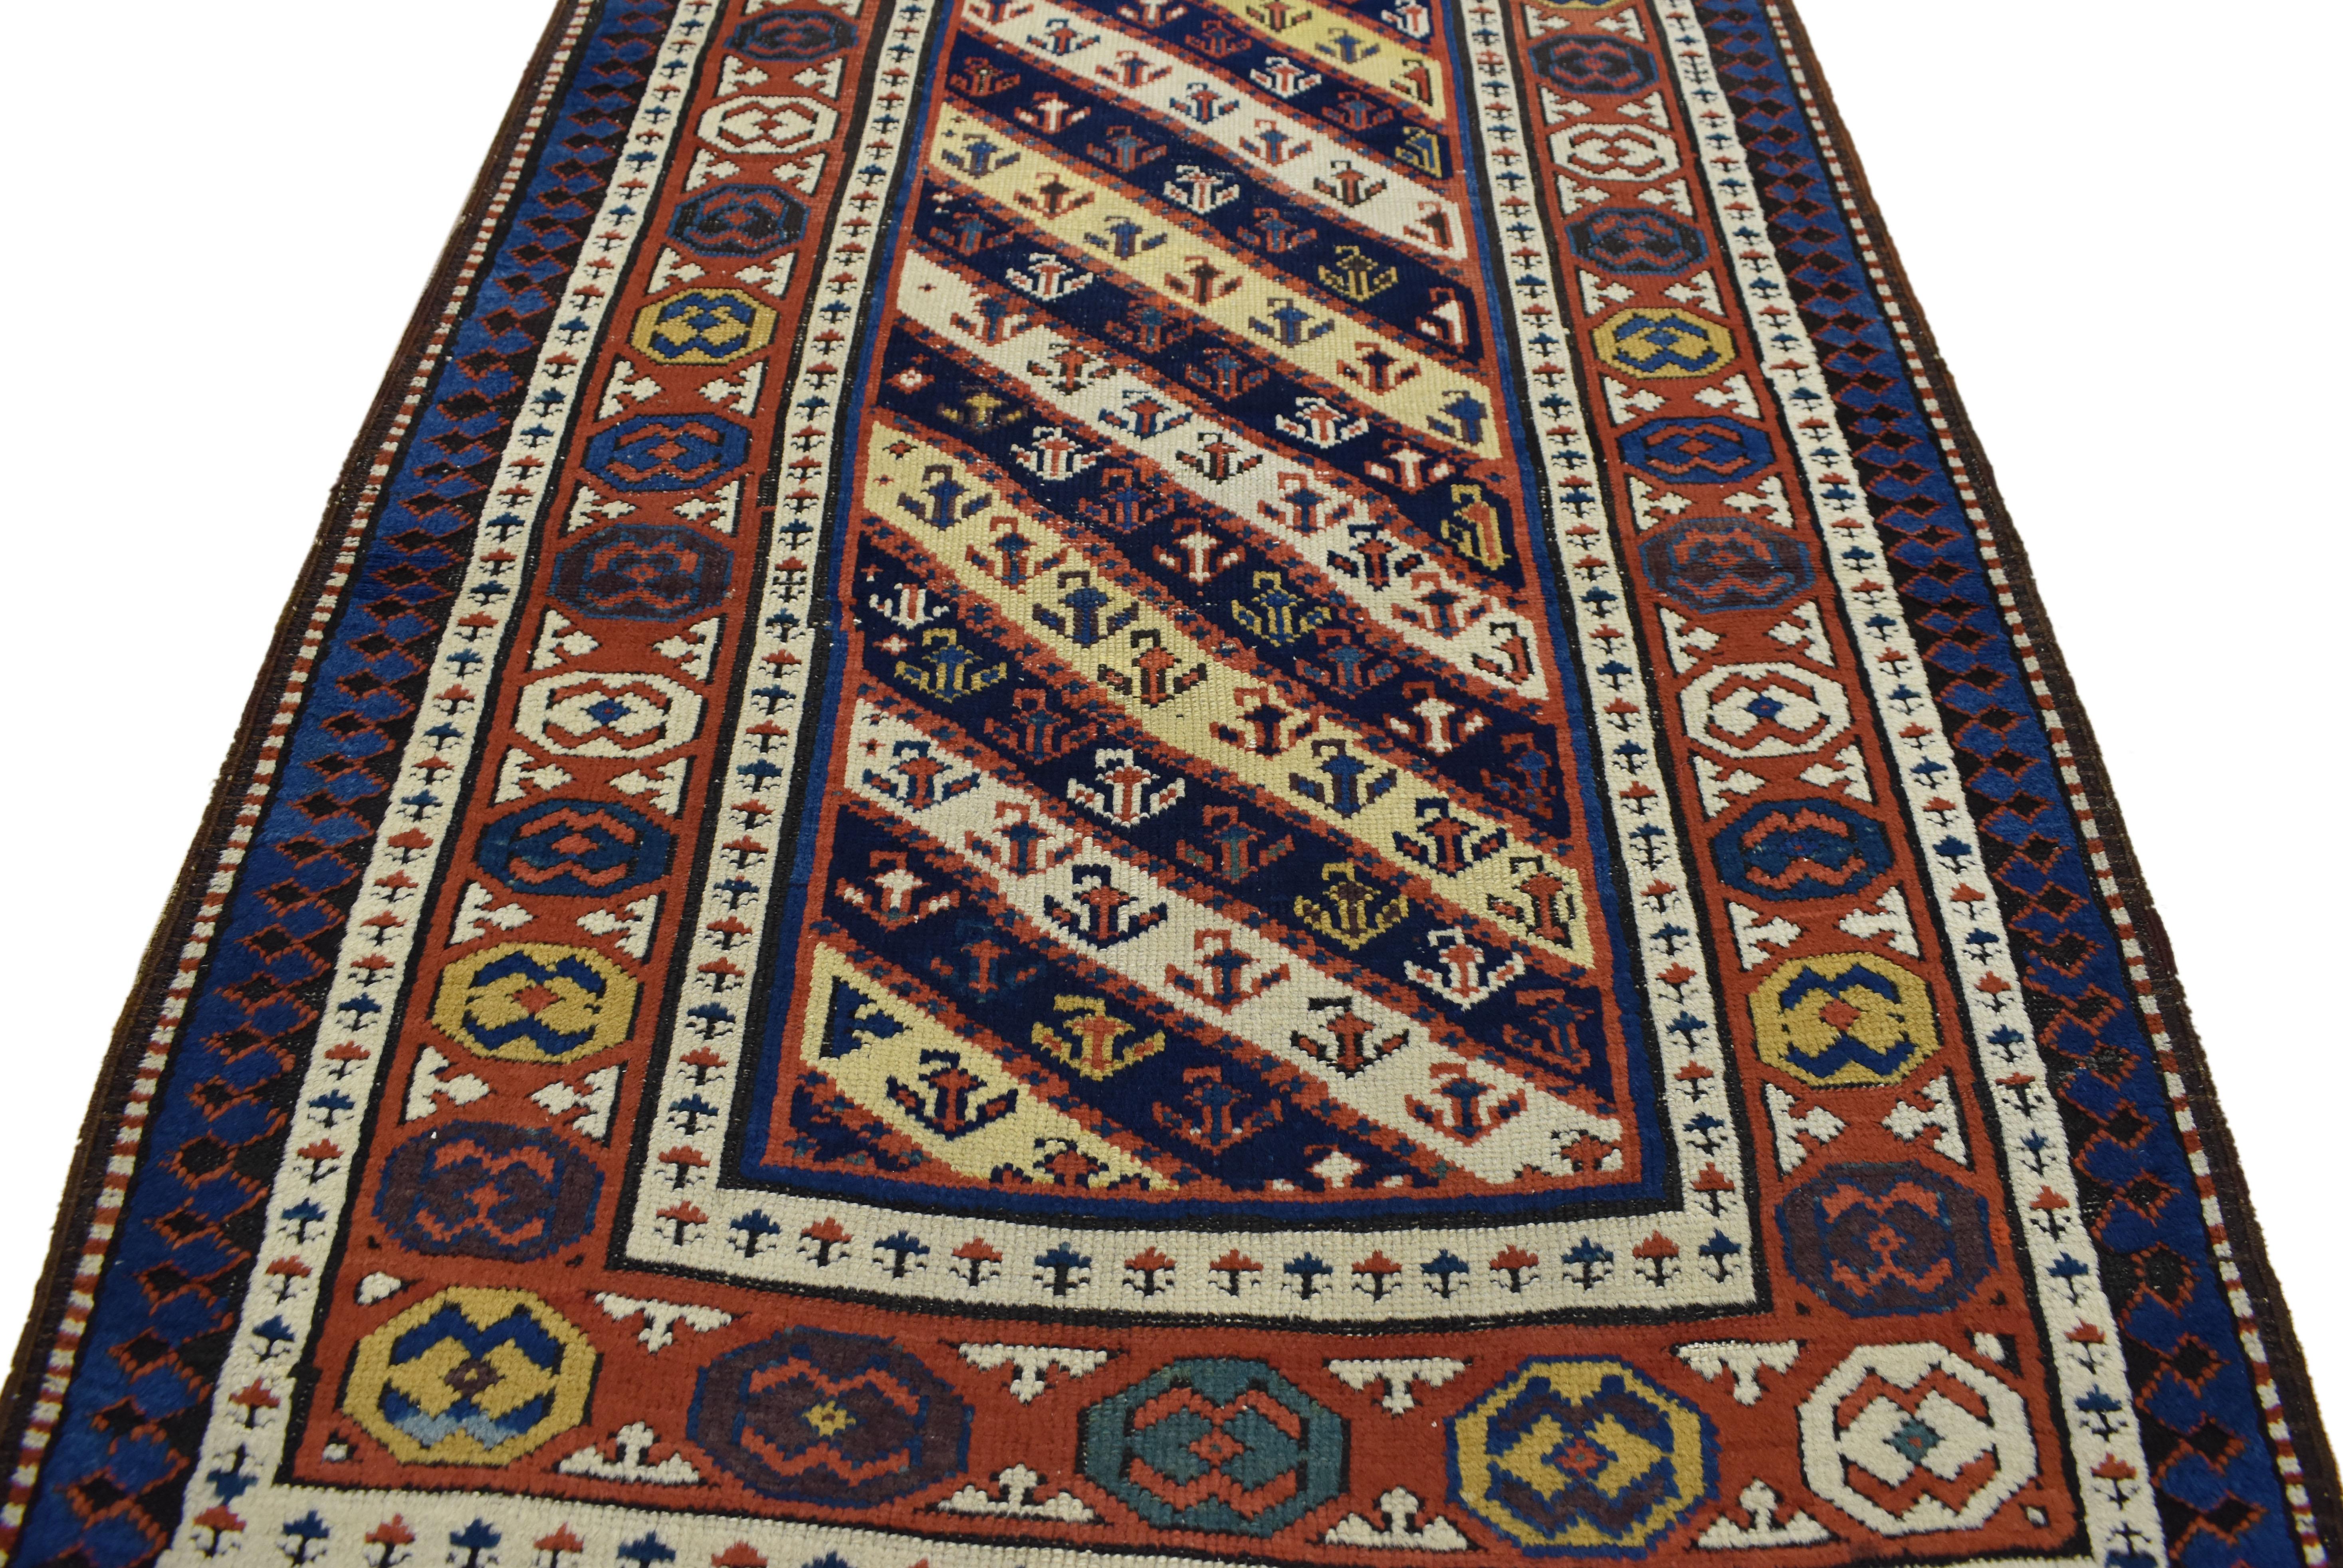 73235, antique Caucasian Kuba runner with tribal style, hallway runner. The antique Caucasian Gendje tribal runner communicates some of the finer and more important points of geometric design elements from the villages of Gendje. Classically